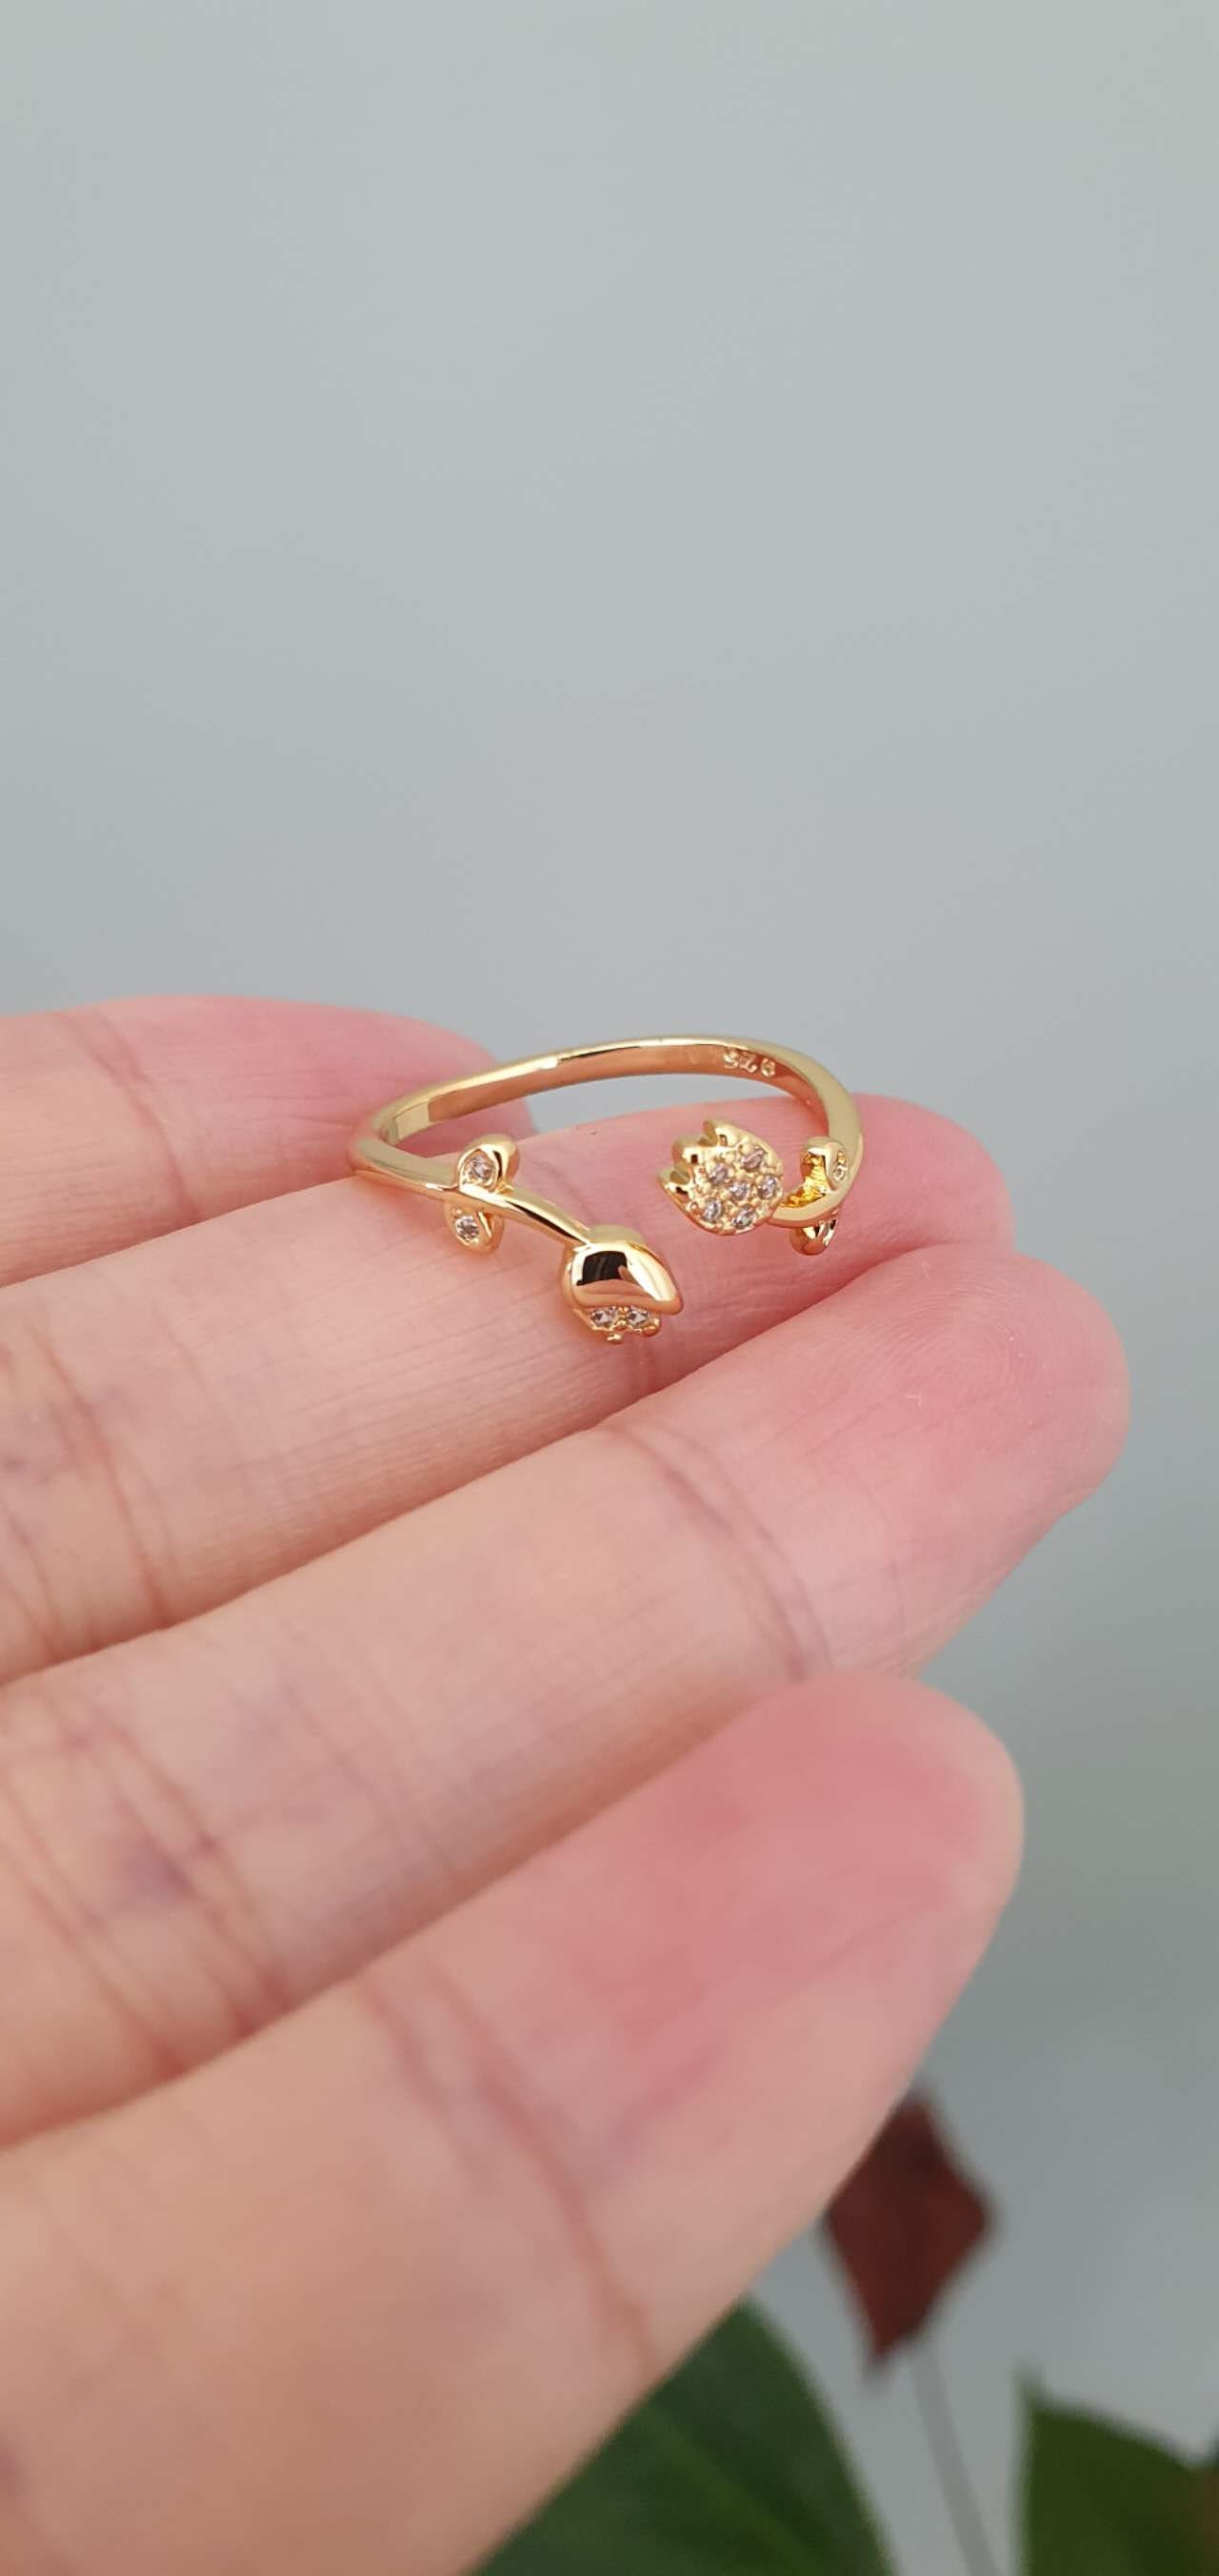 50 pcs * Tail Finger Ring Ring Ladies Flower Index Open Ring Accessories  Personalized Rings Color Random Rings Jewelry Gift - Walmart.com